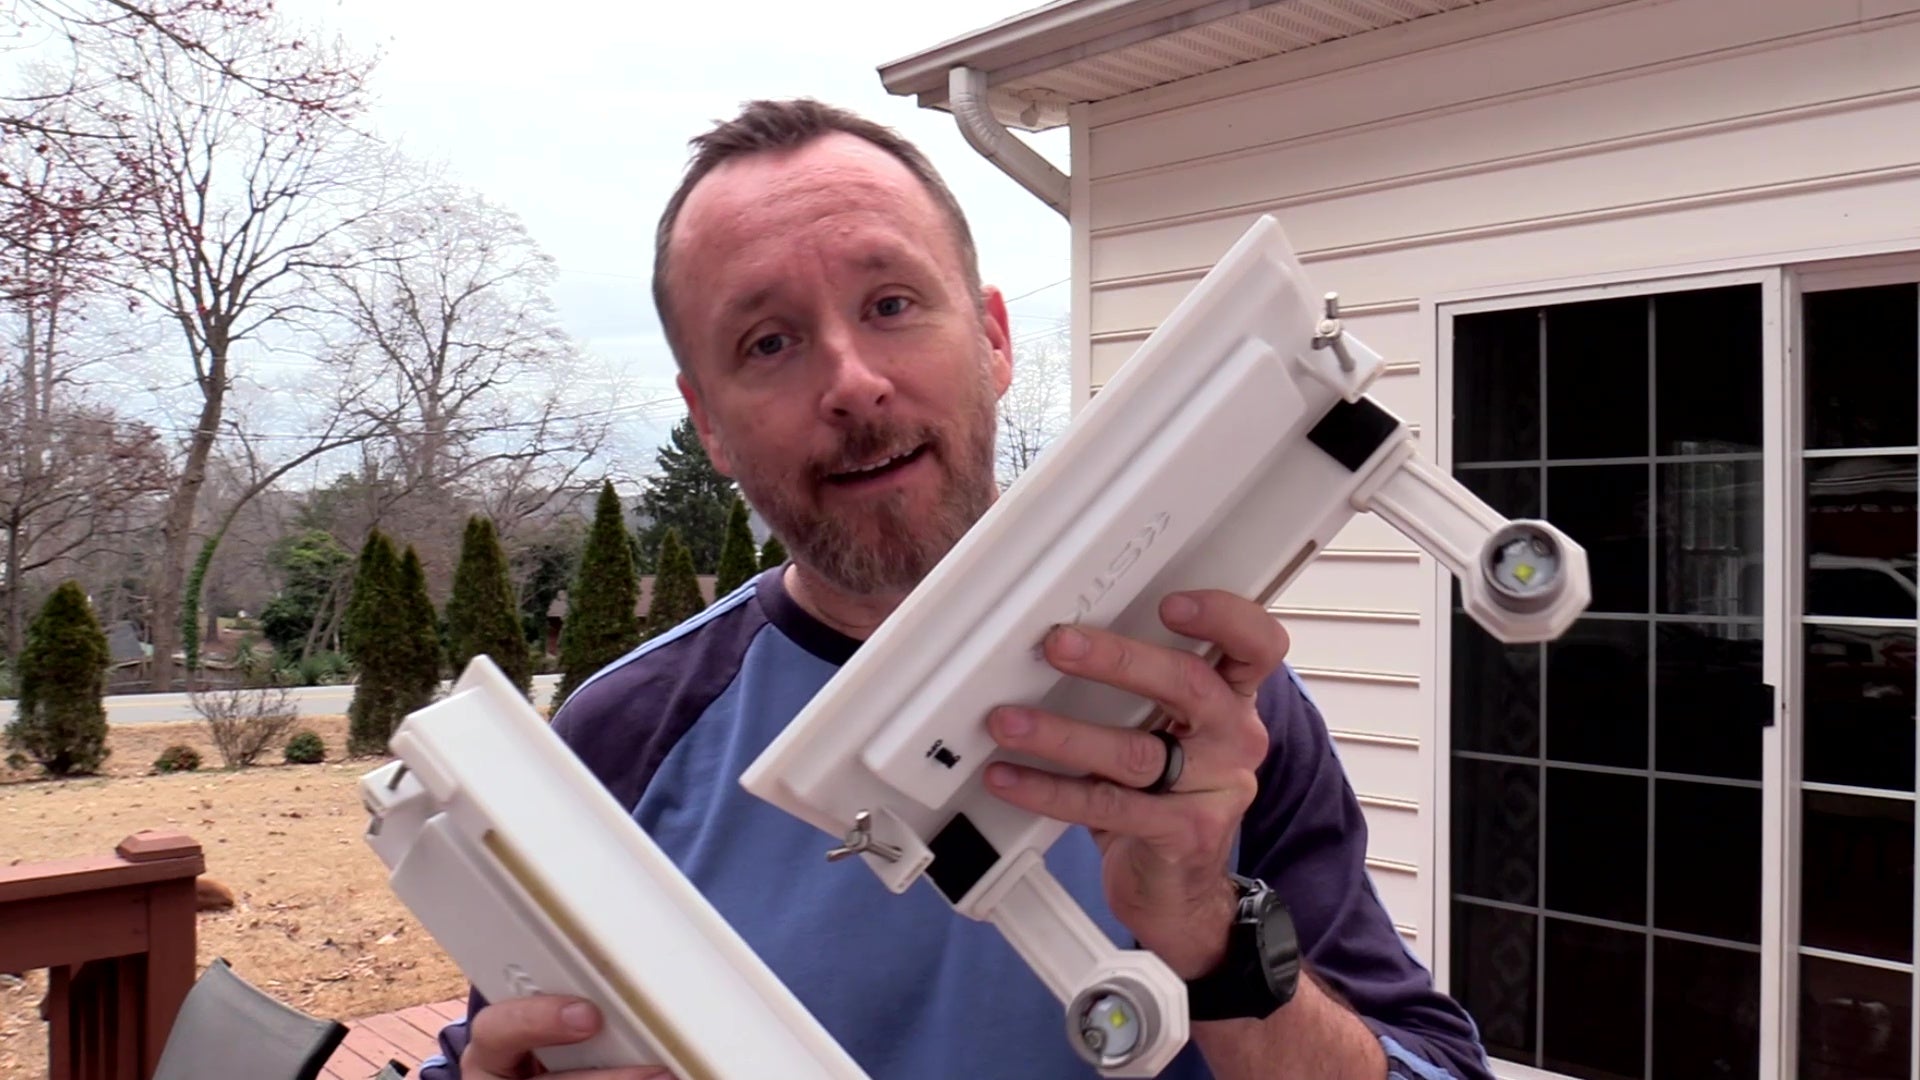 Sales video showing the features and benefits of our EZ Home Security Solar Gutter Lights